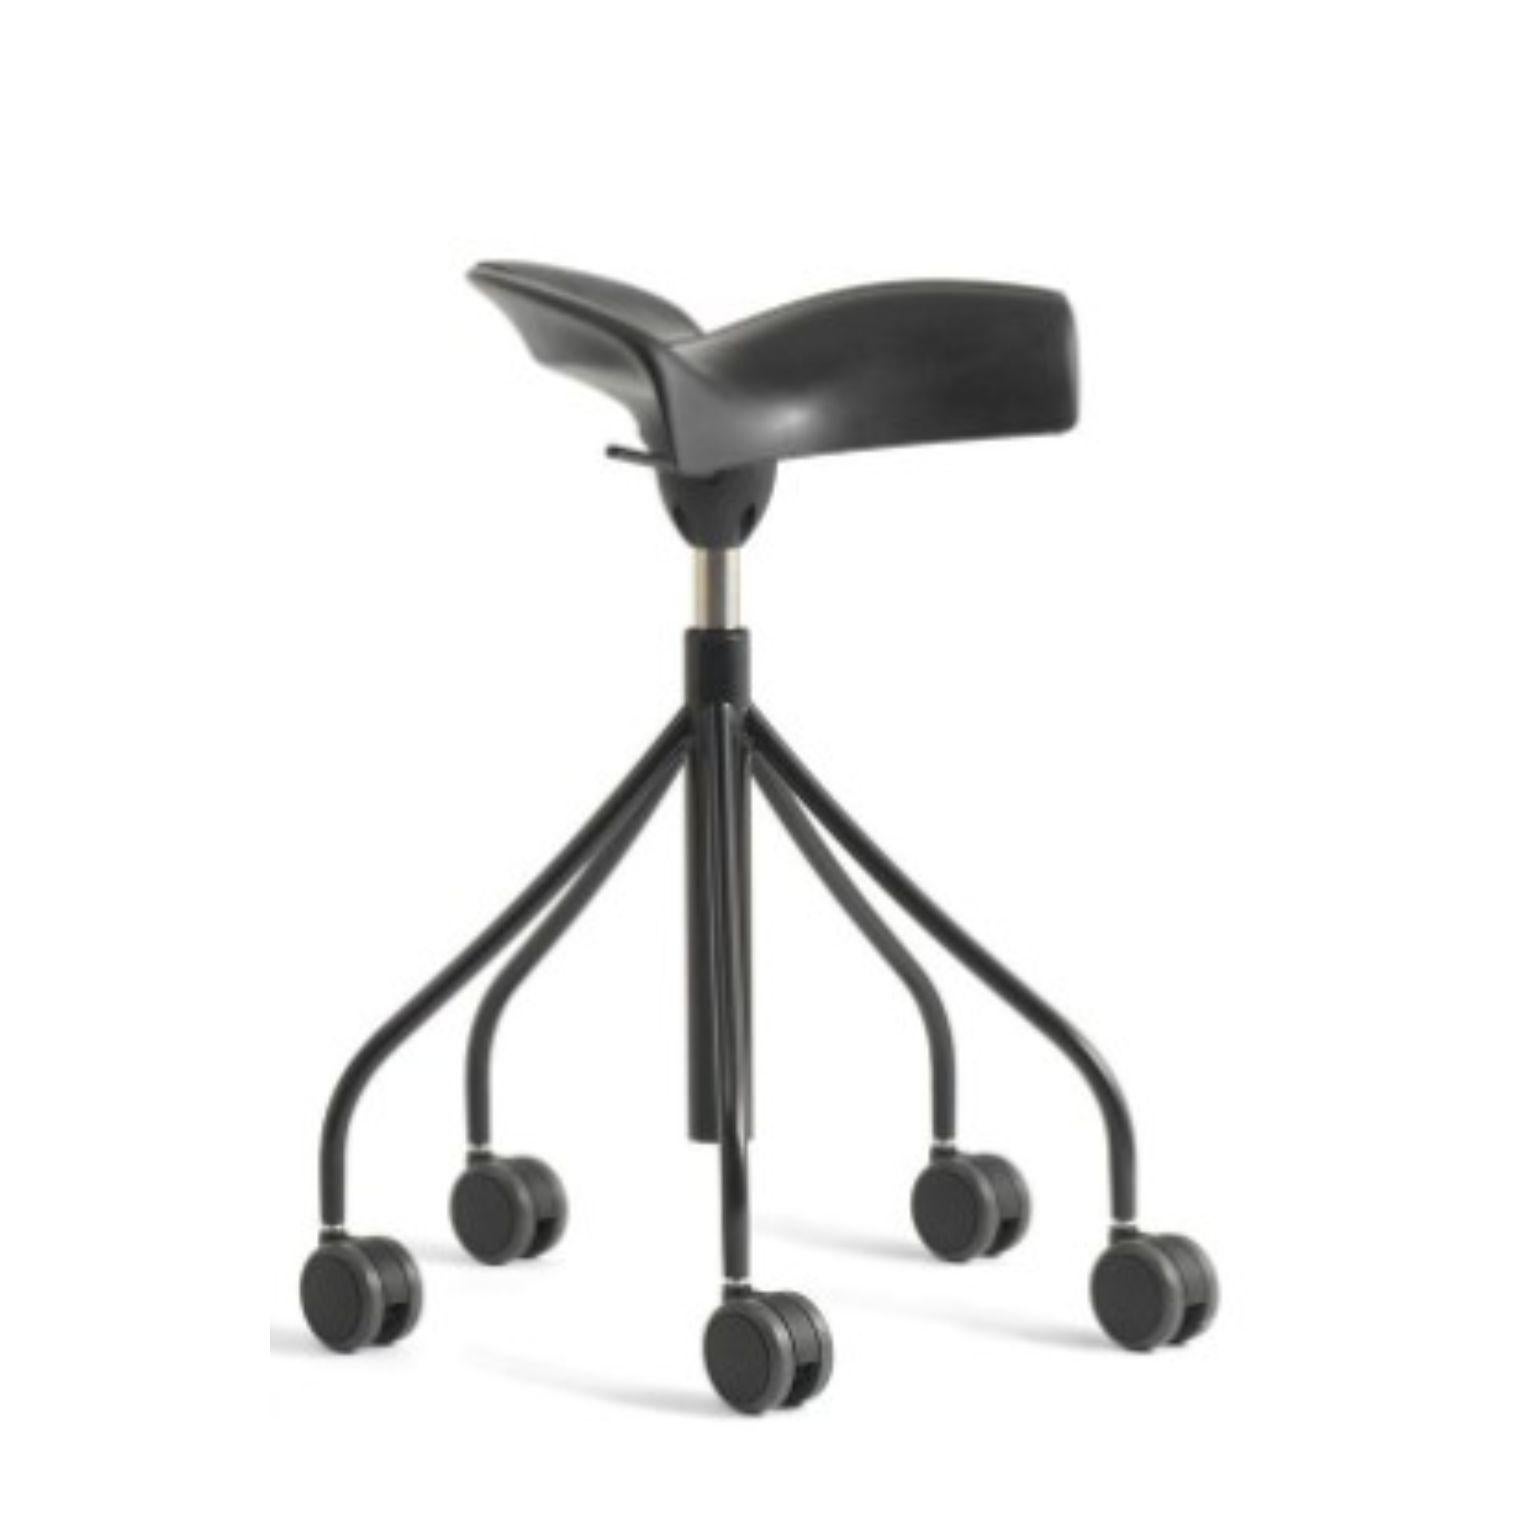 Binaria black stool by Otto Canalda & Jordi Badia
Dimensions: Diameter 65 x Height 82 cm 
Materials: Steel structure and lever painted in a polyester powder coating and satin finish. Available in White RAL 1013, Red RAL 3002, or Black RAL 9005.